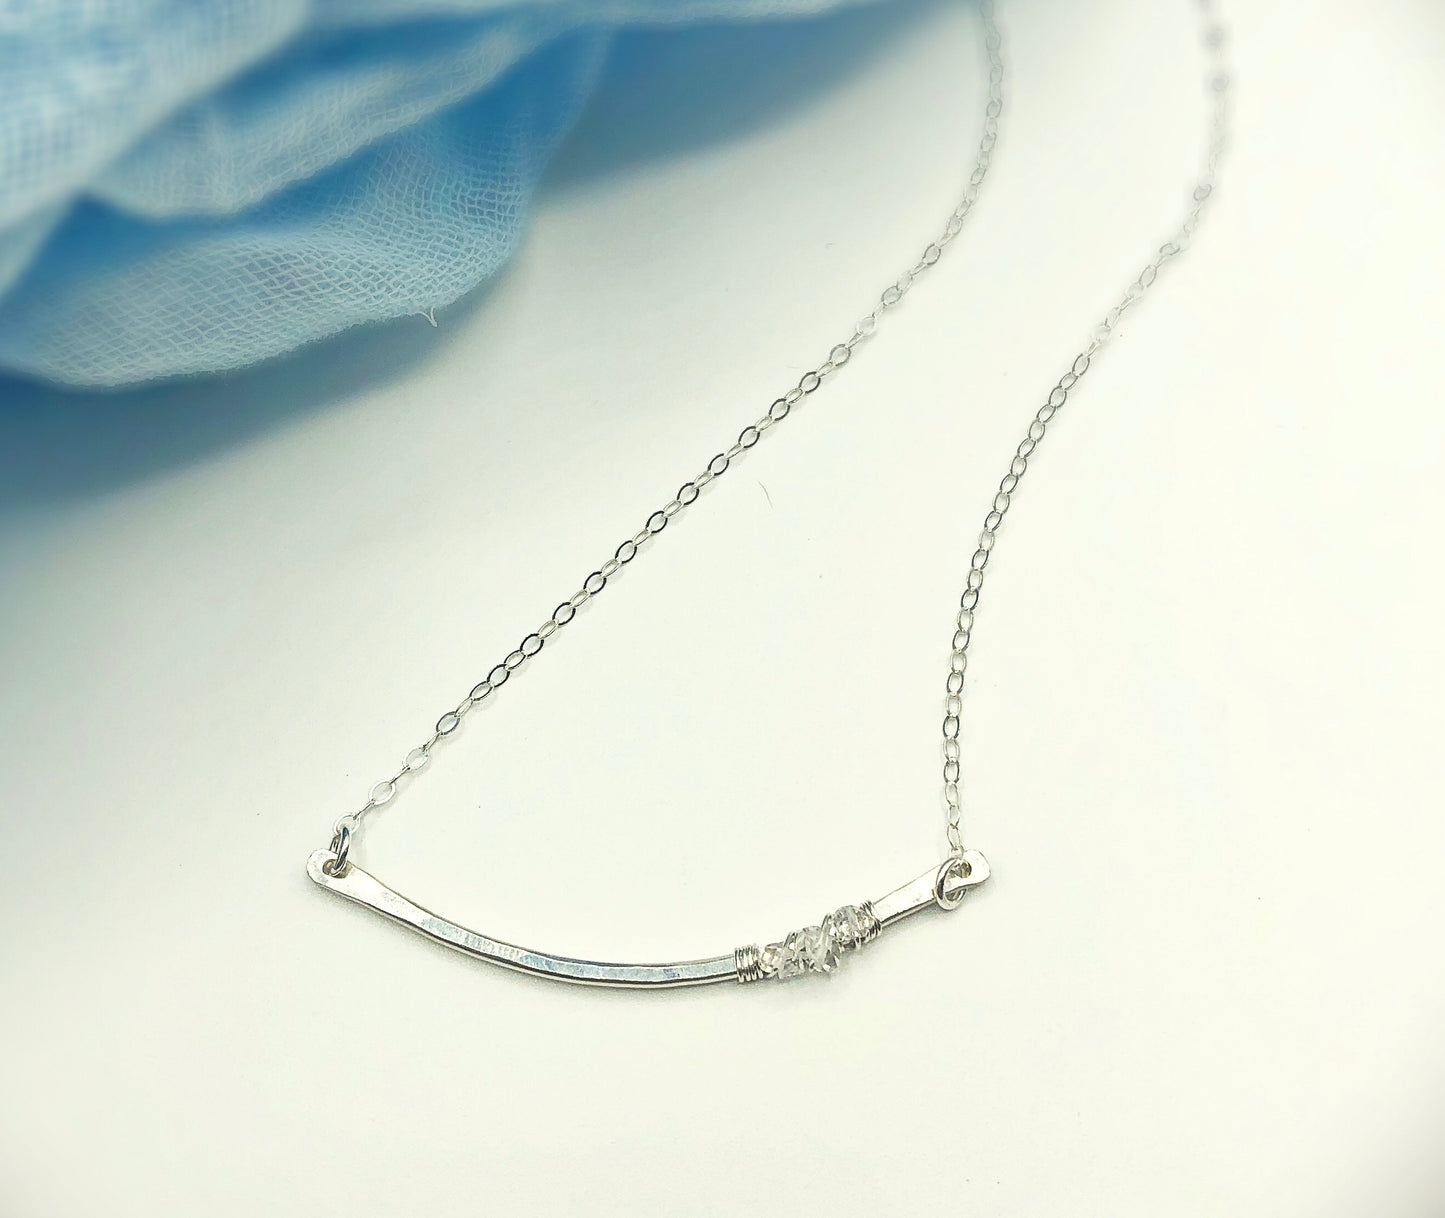 Salt Water Curved Bar Necklace - Blue Sky Feathers